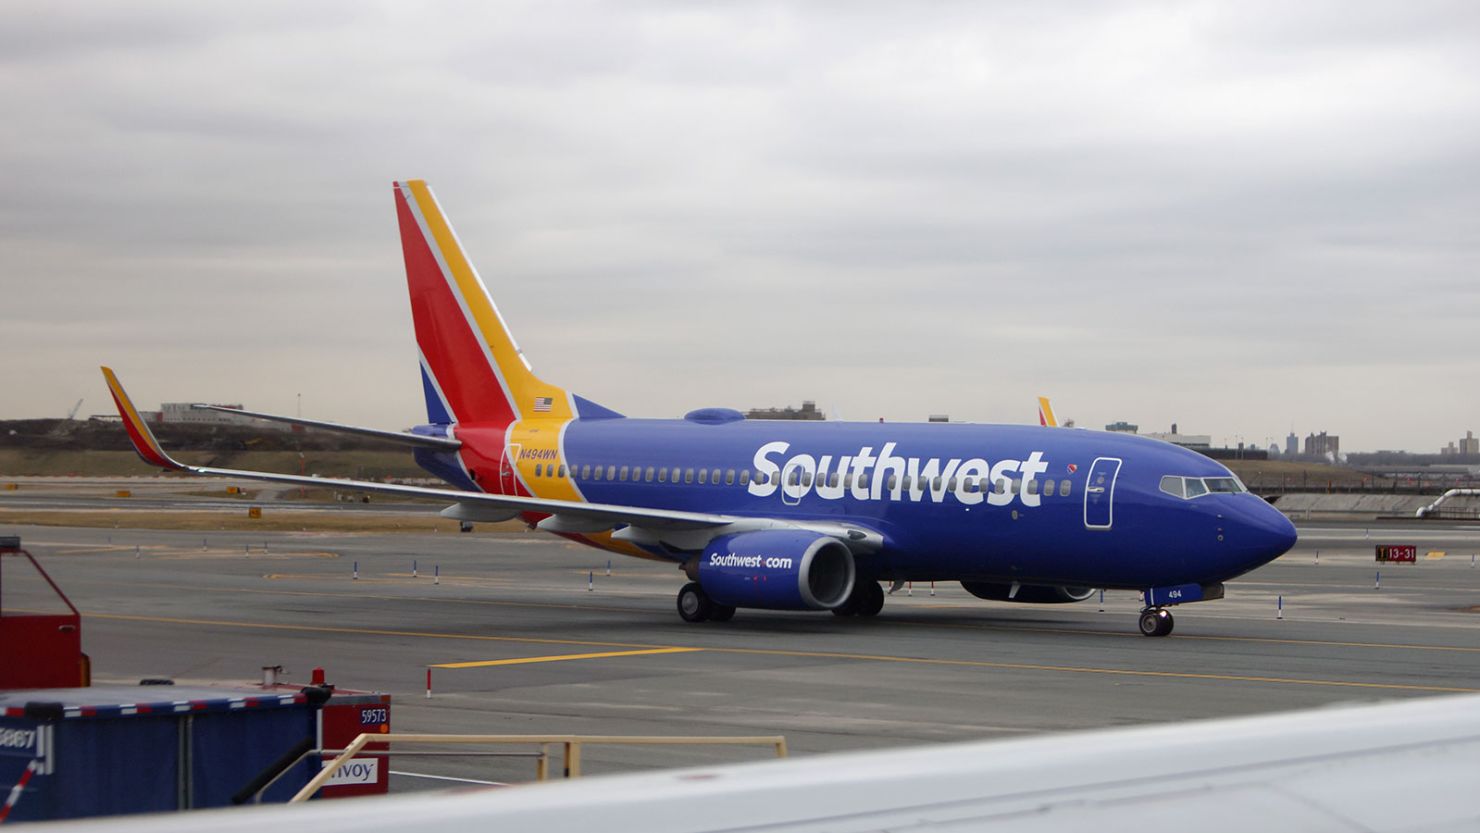 A Southwest Airlines at LaGuardia Airport in New York. Southwest announced Thursday it is dropping services at four airports due to delays in deliveries of new jets by Boeing.